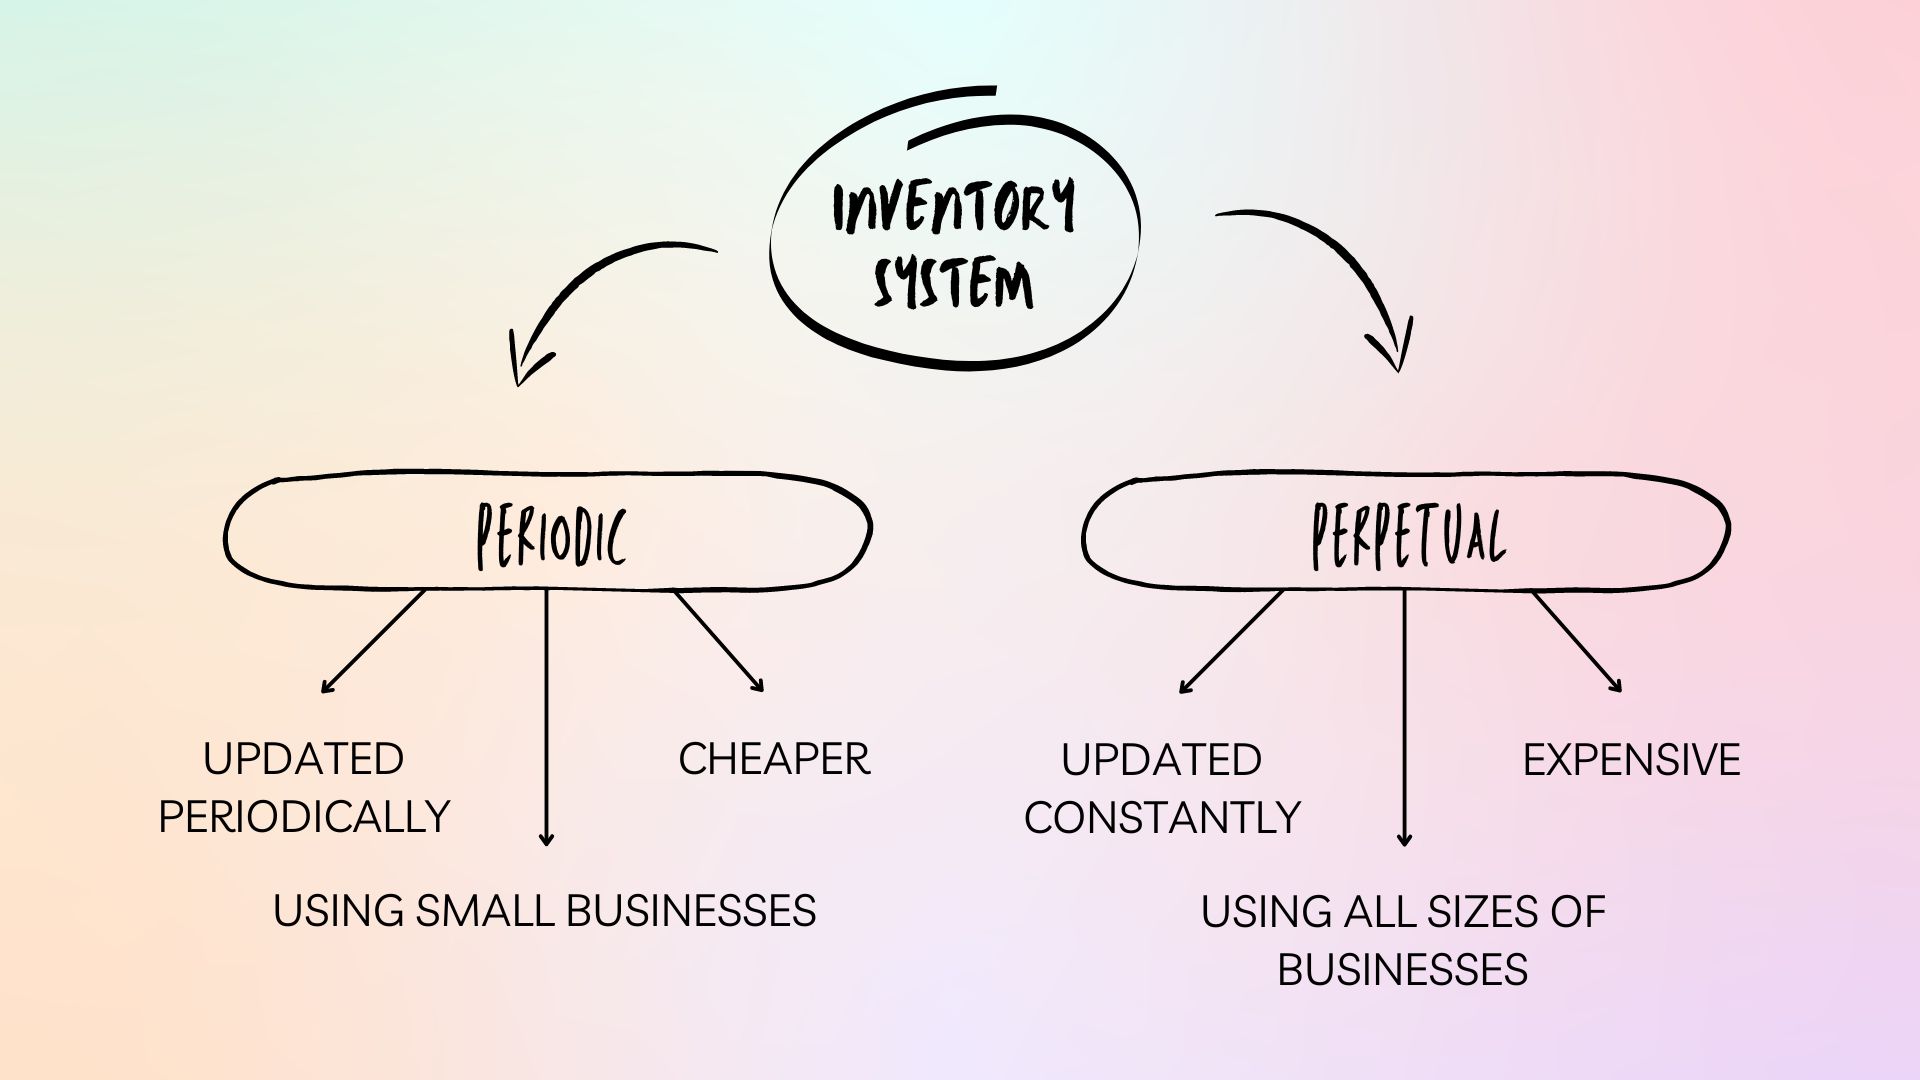 Periodic Inventory System vs Perpetual Inventory System